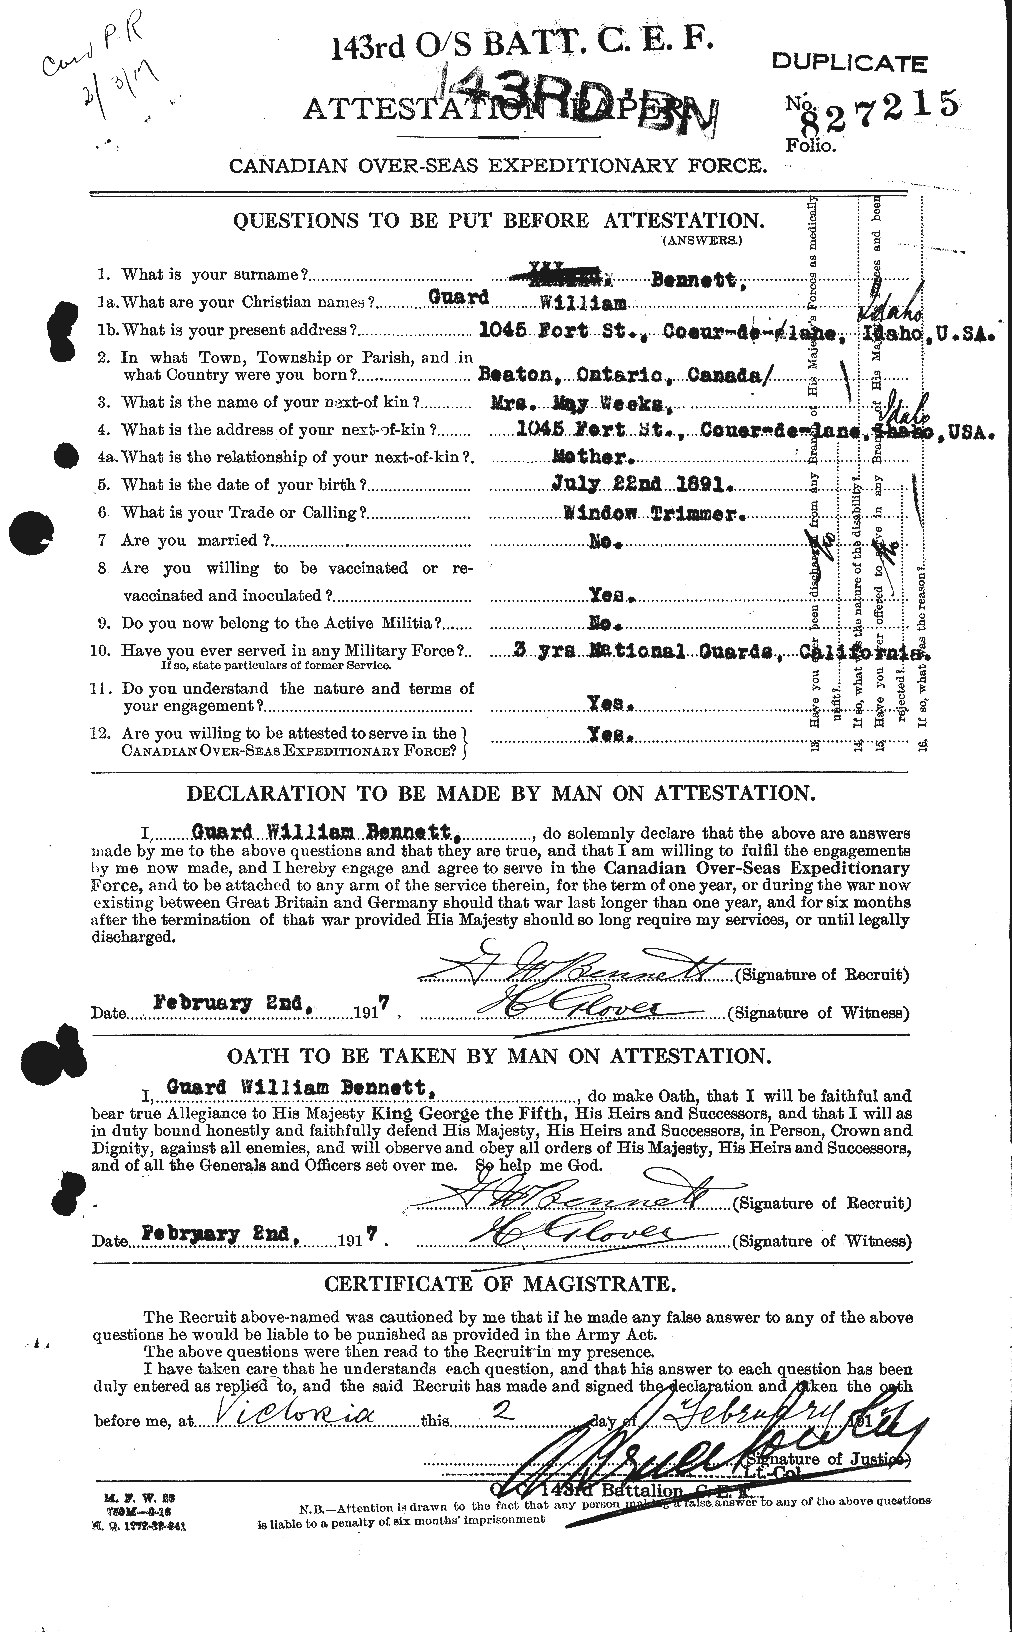 Personnel Records of the First World War - CEF 238439a